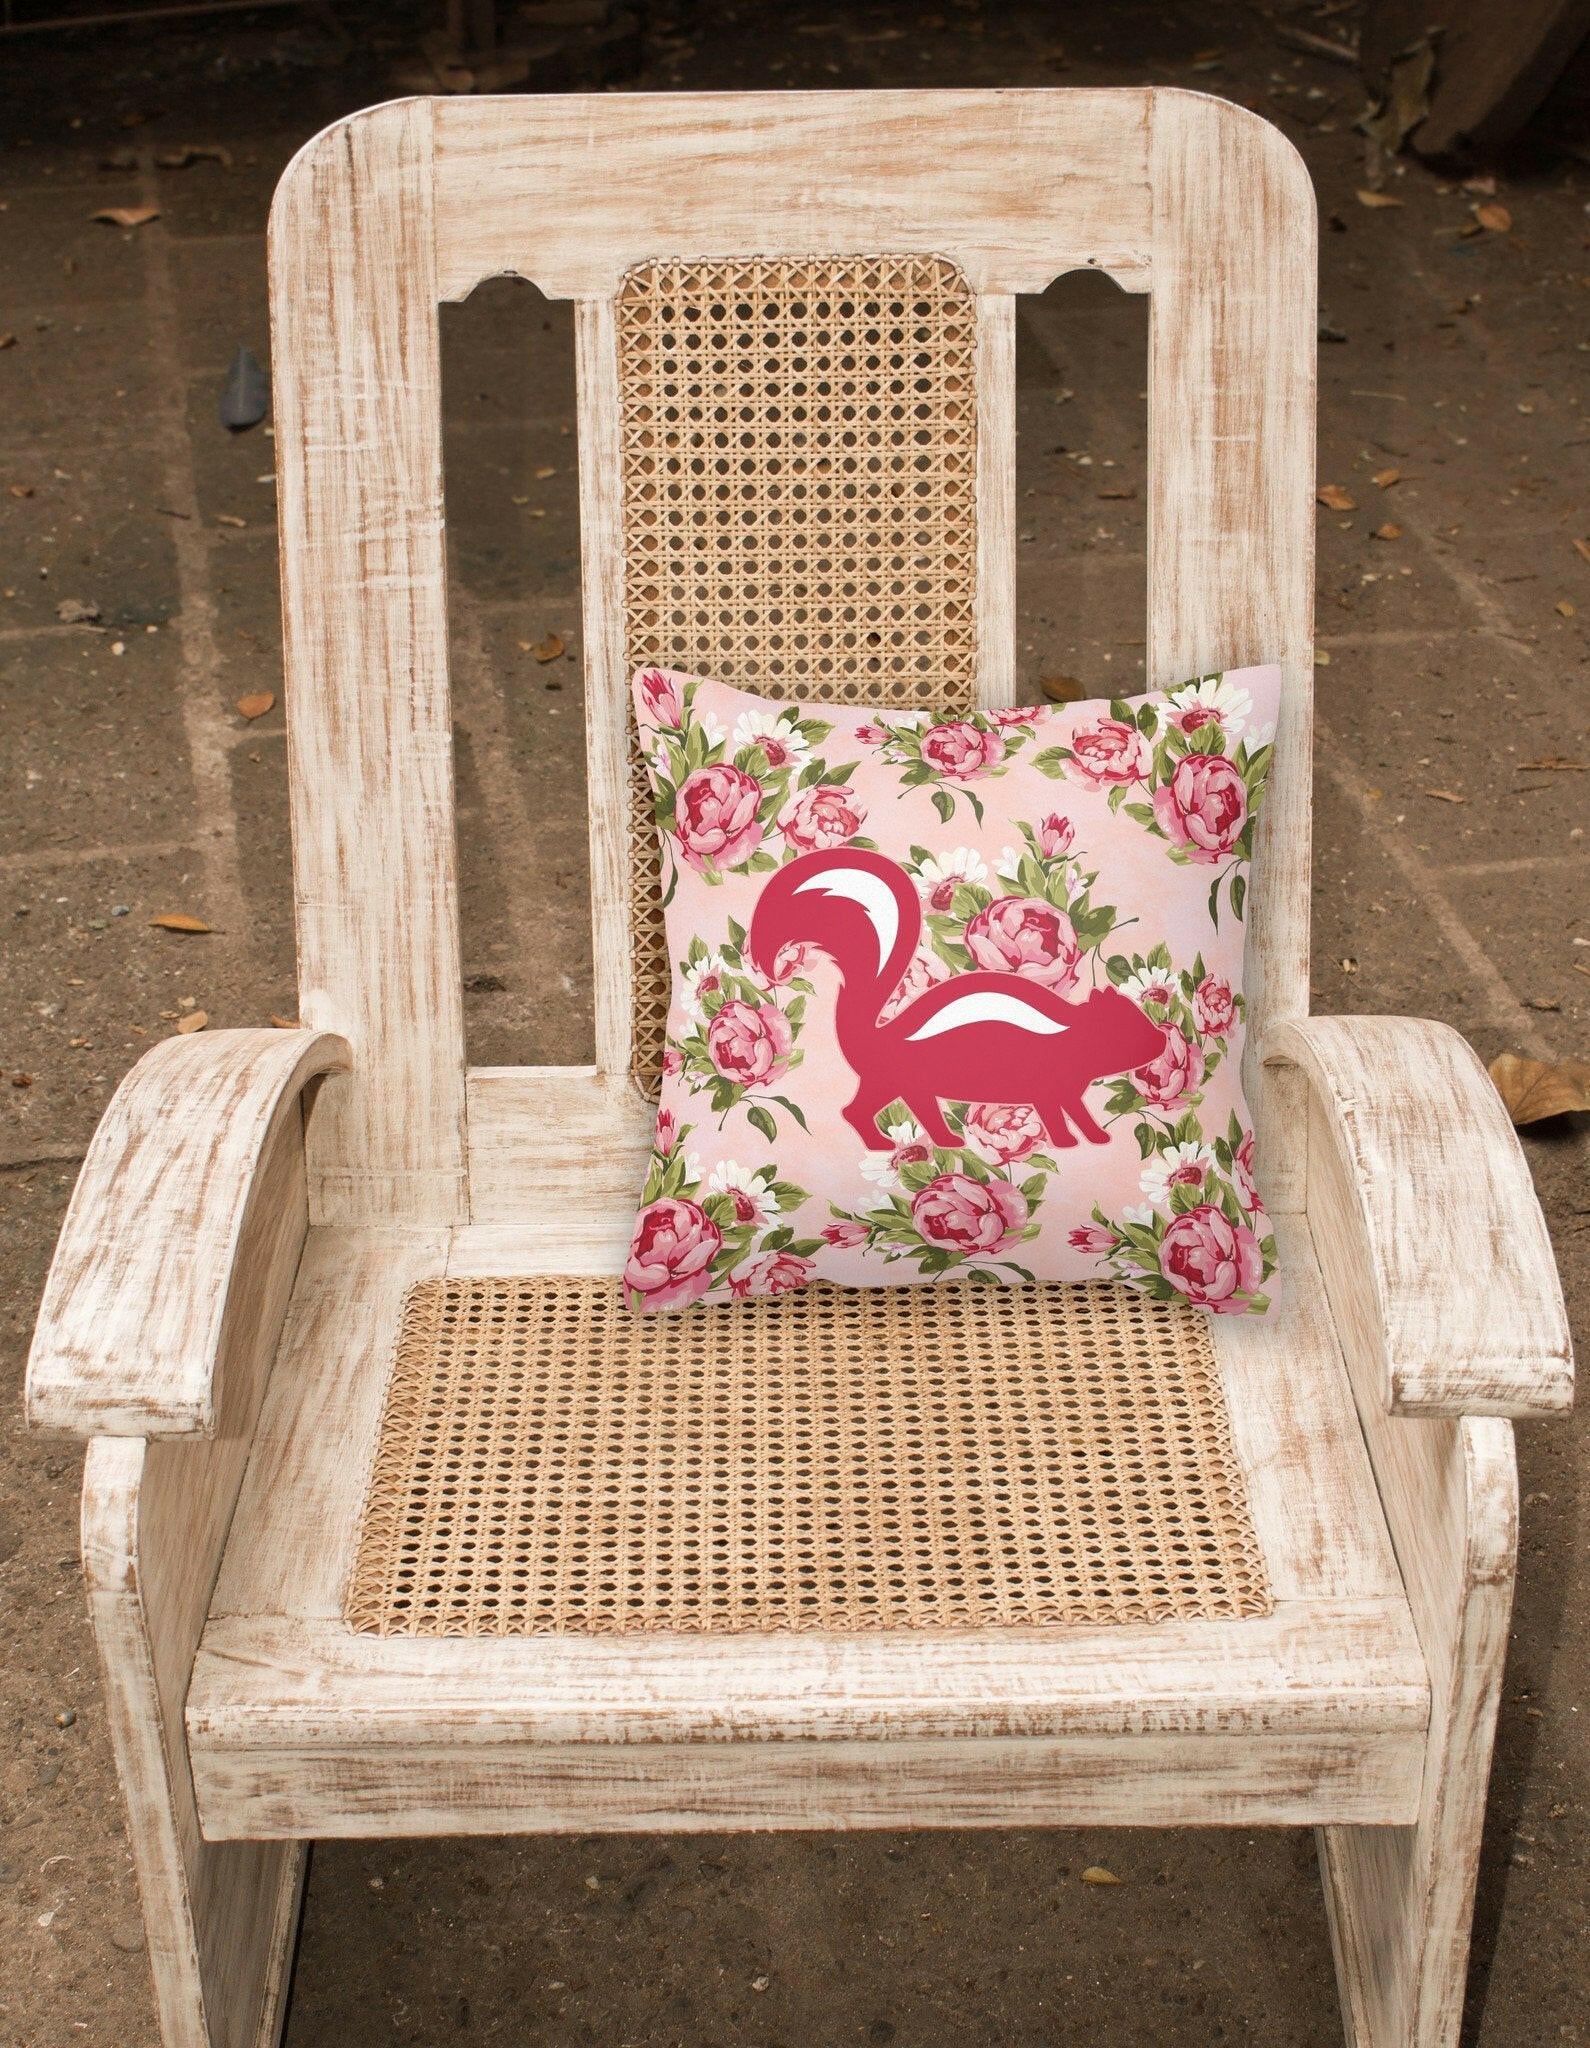 Skunk Shabby Chic Pink Roses  Fabric Decorative Pillow BB1125-RS-PK-PW1414 - the-store.com